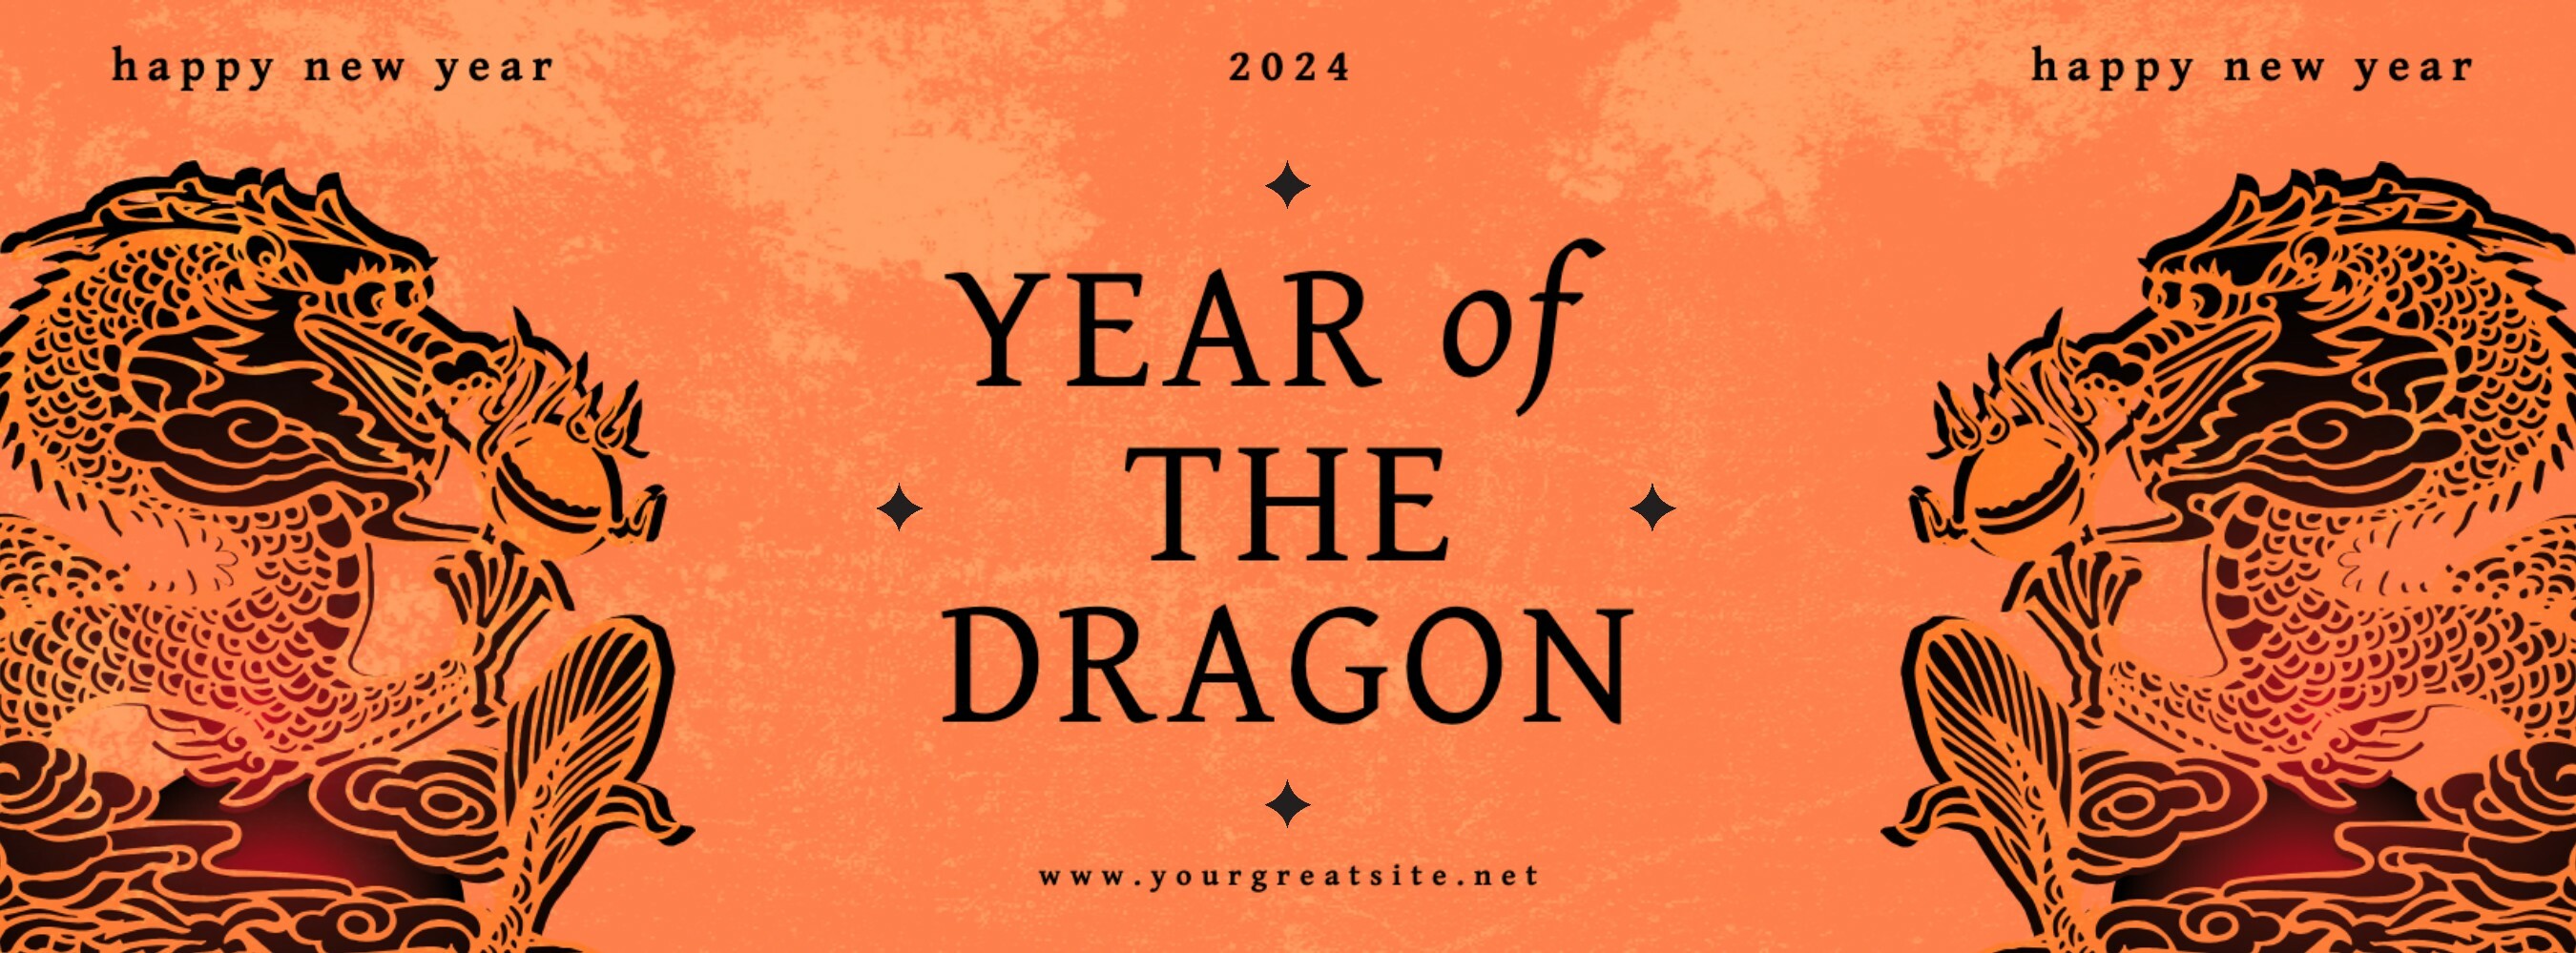 chinese new year social media banner in orange with dragon